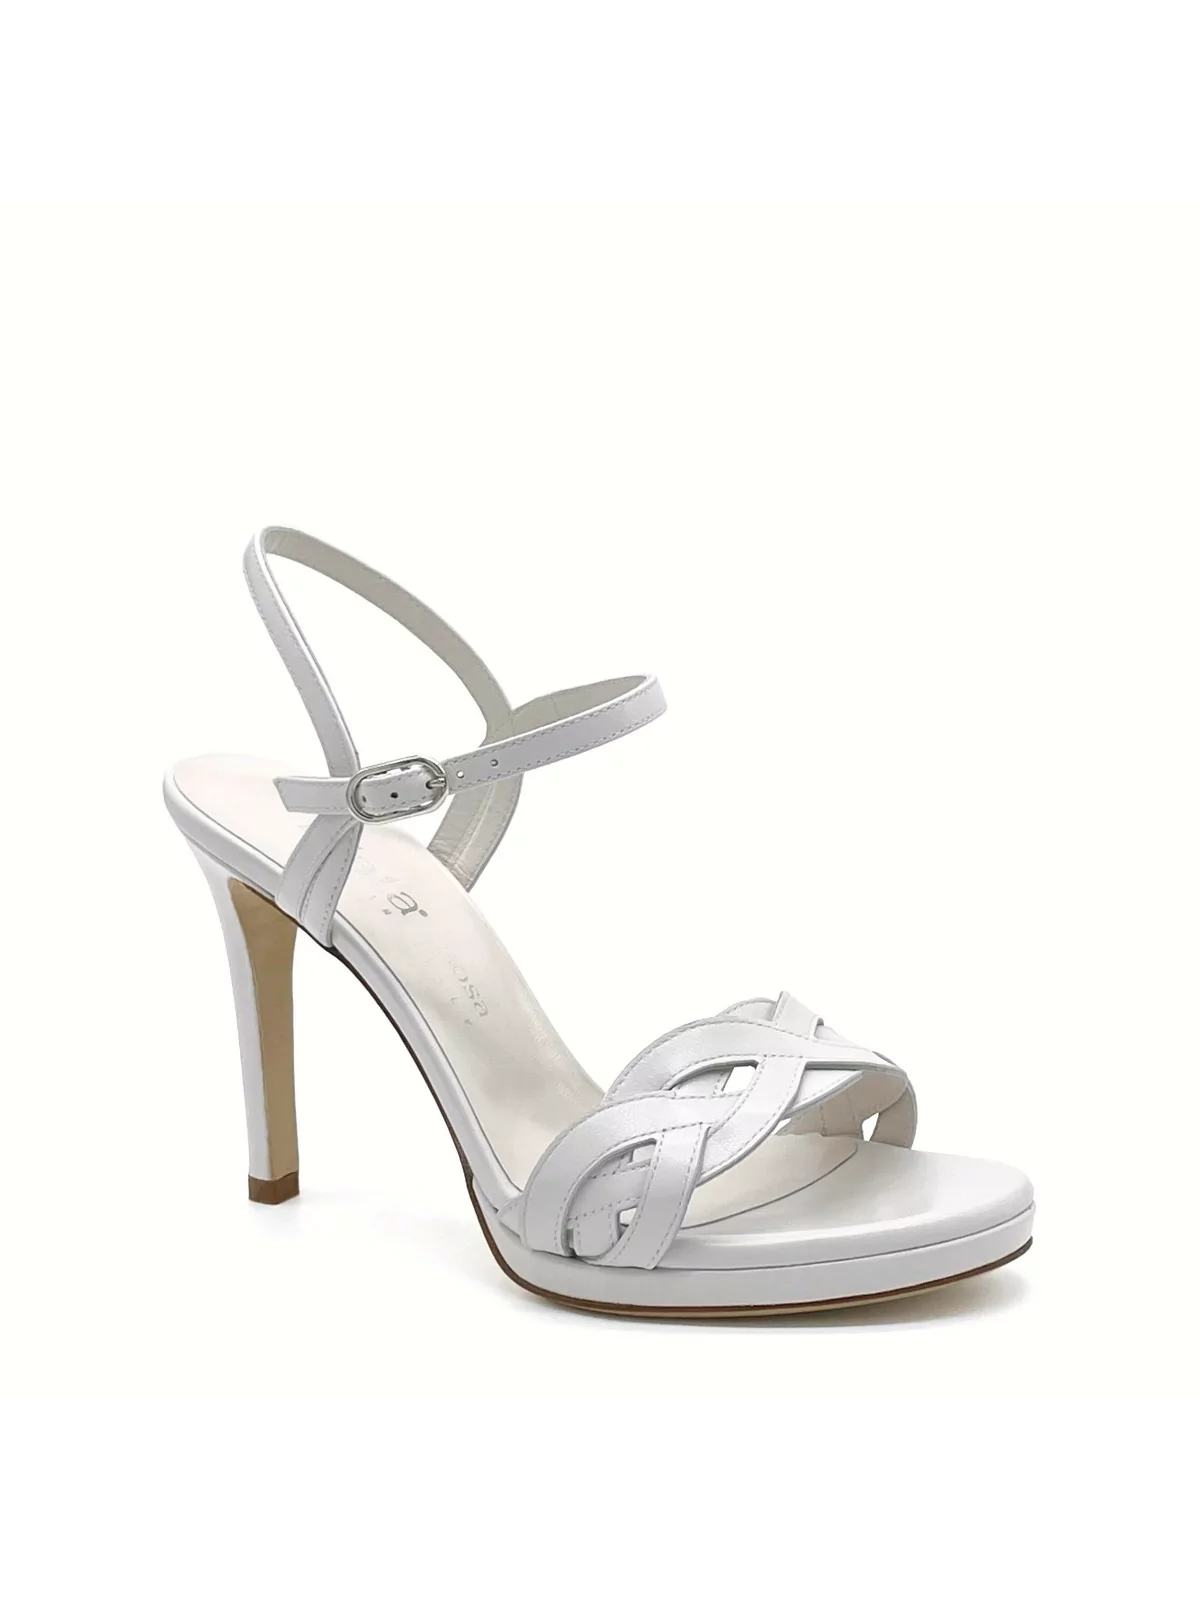 White leather sandal with intertwined band. Leather lining. Leather sole. 10 cm 